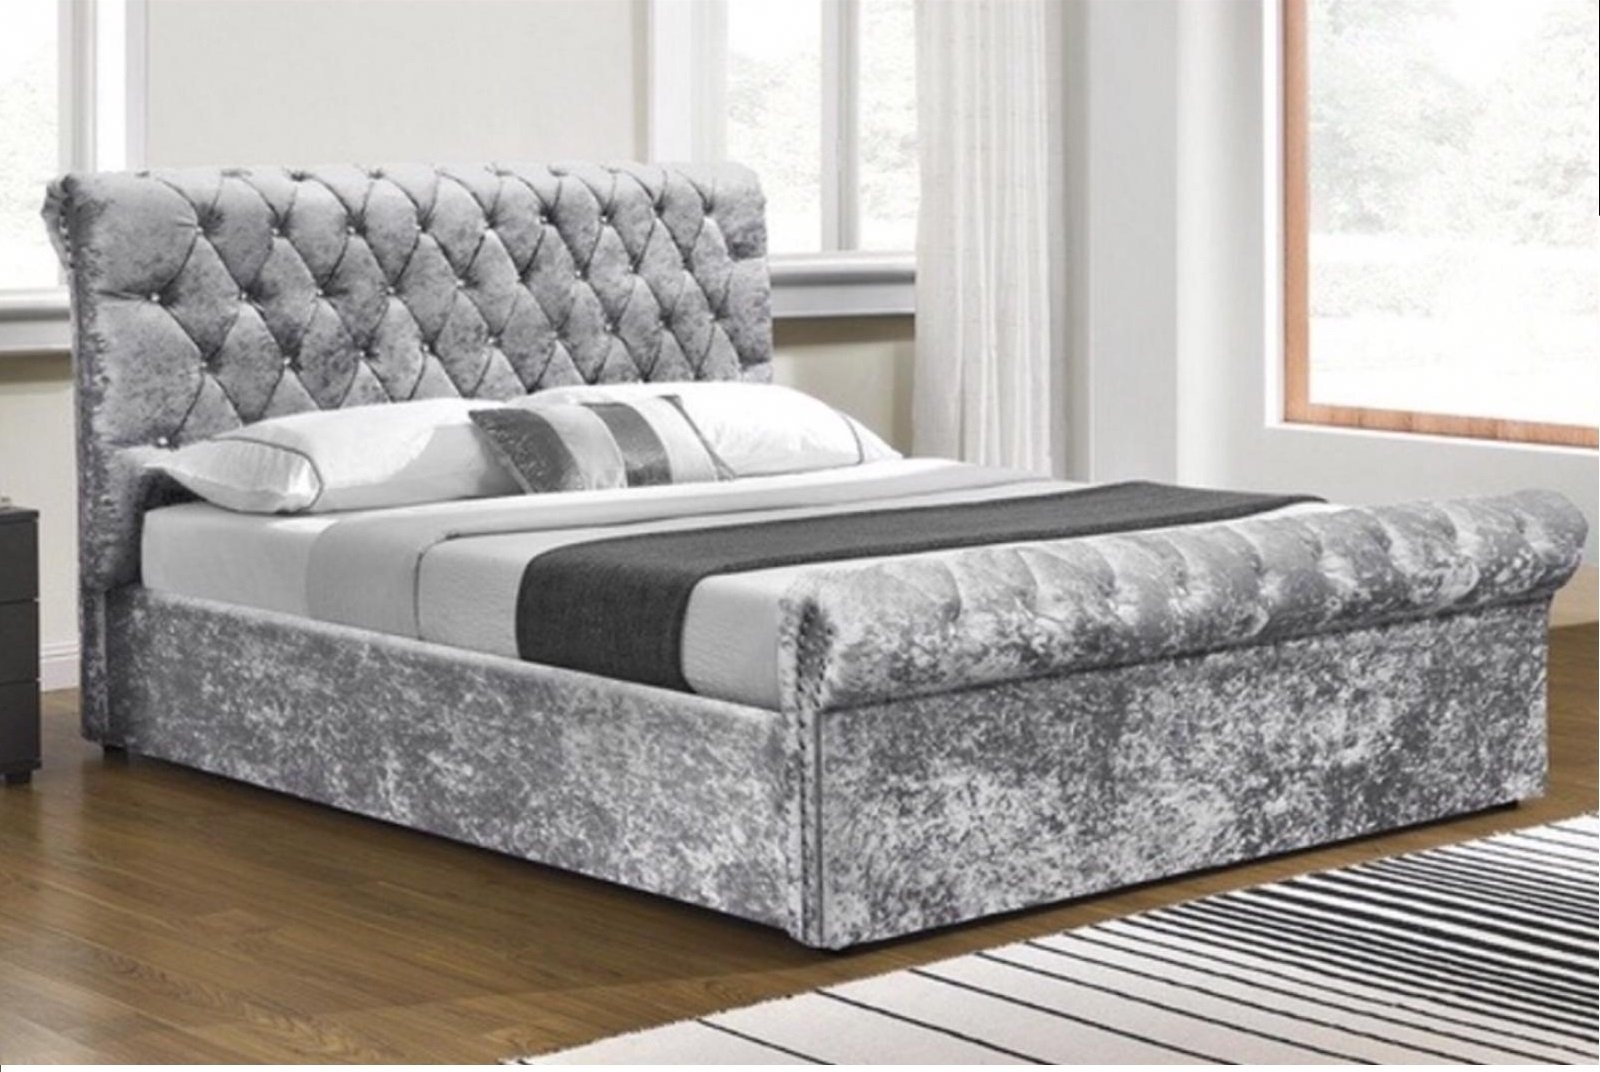 Chesterfield Bed Available In All Colours Sizes Vary From Double King Or Super King